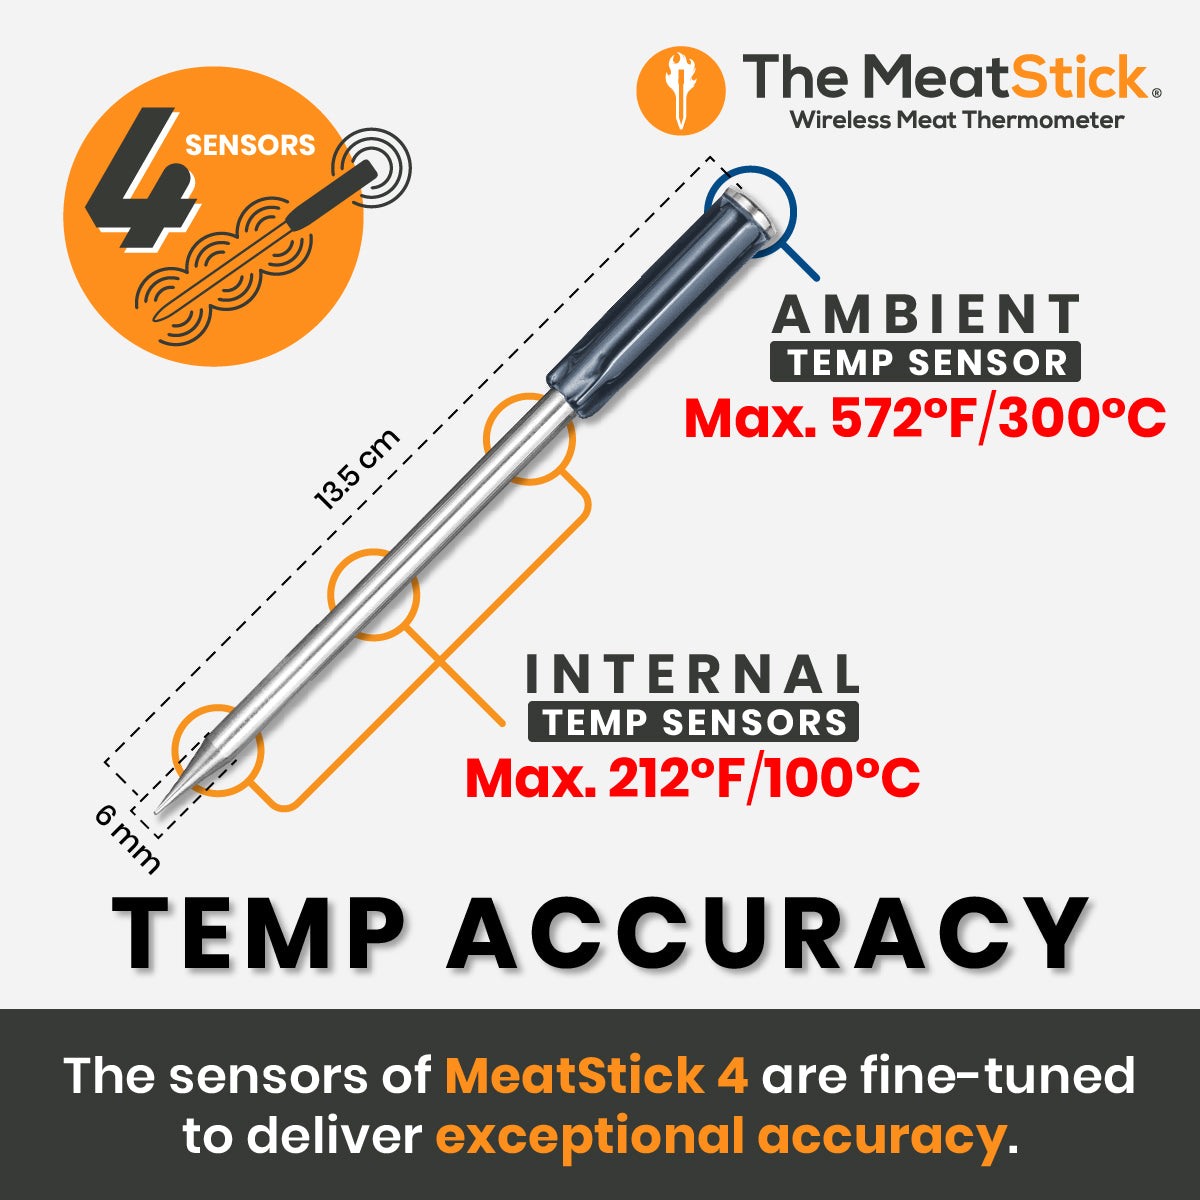 How the MeatStick 4X Thermometer Improves Grilling